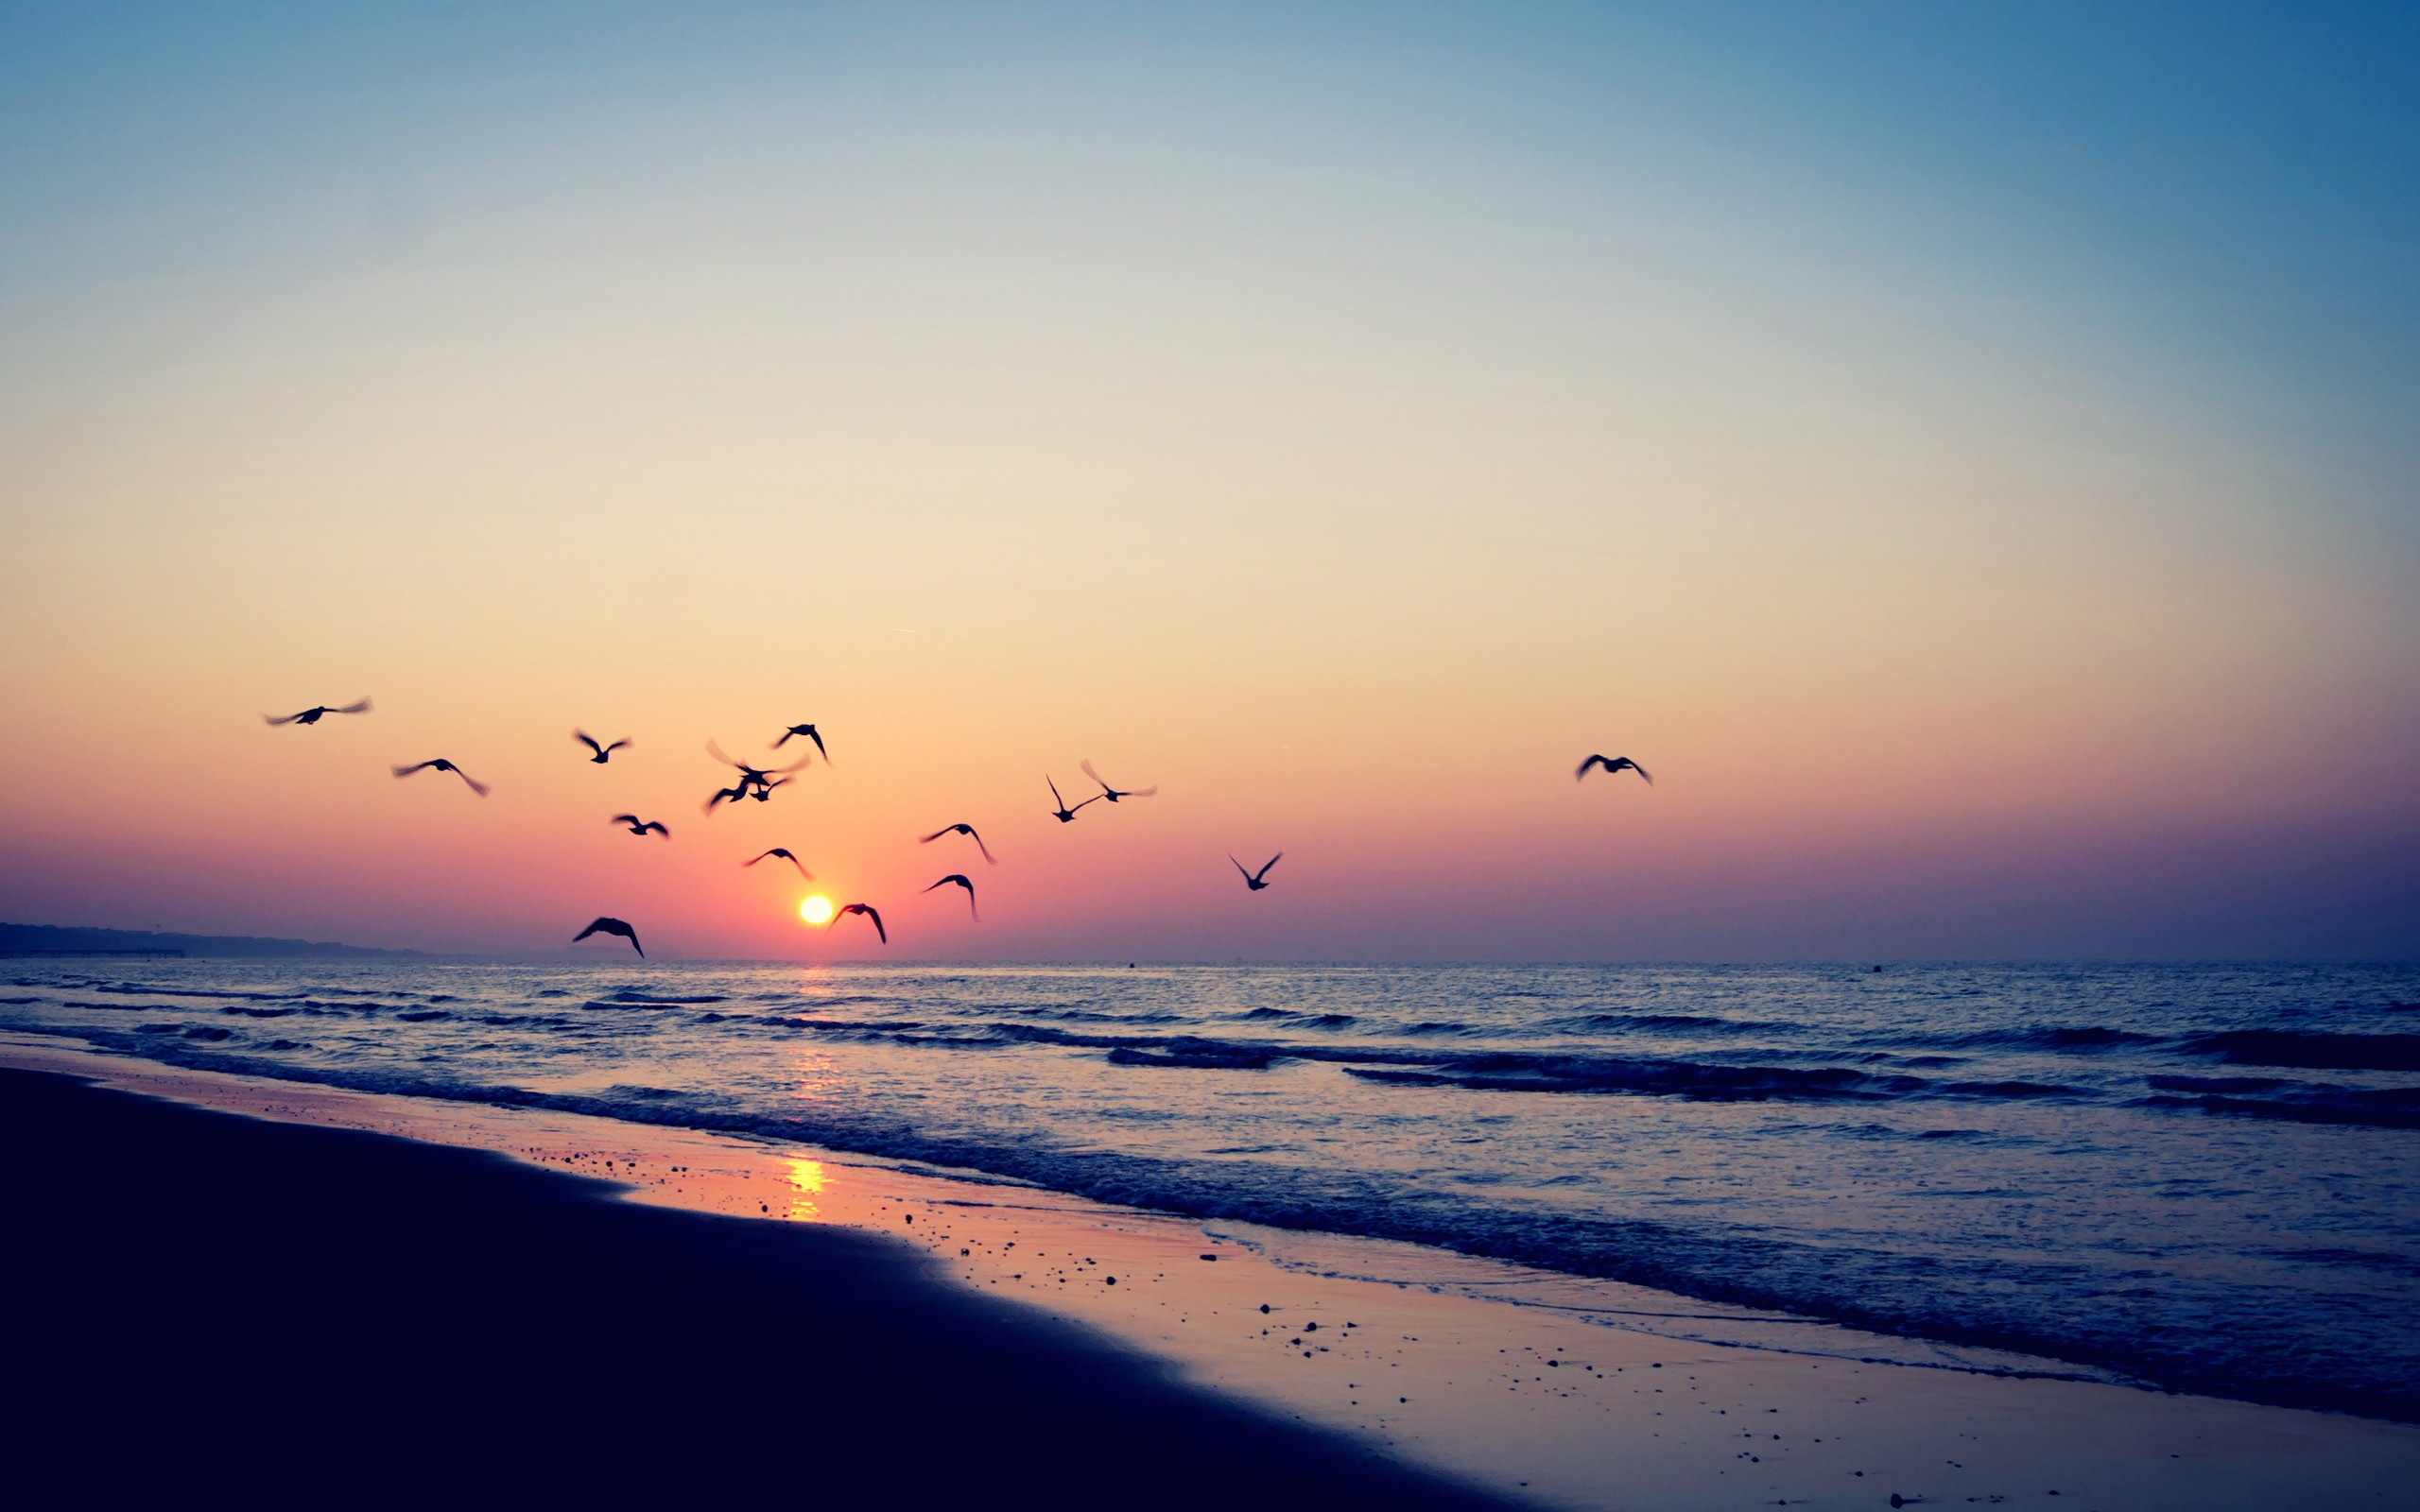 sunsets-nature-beach-sea-birds-vintage-photography-seascapes-hd ...